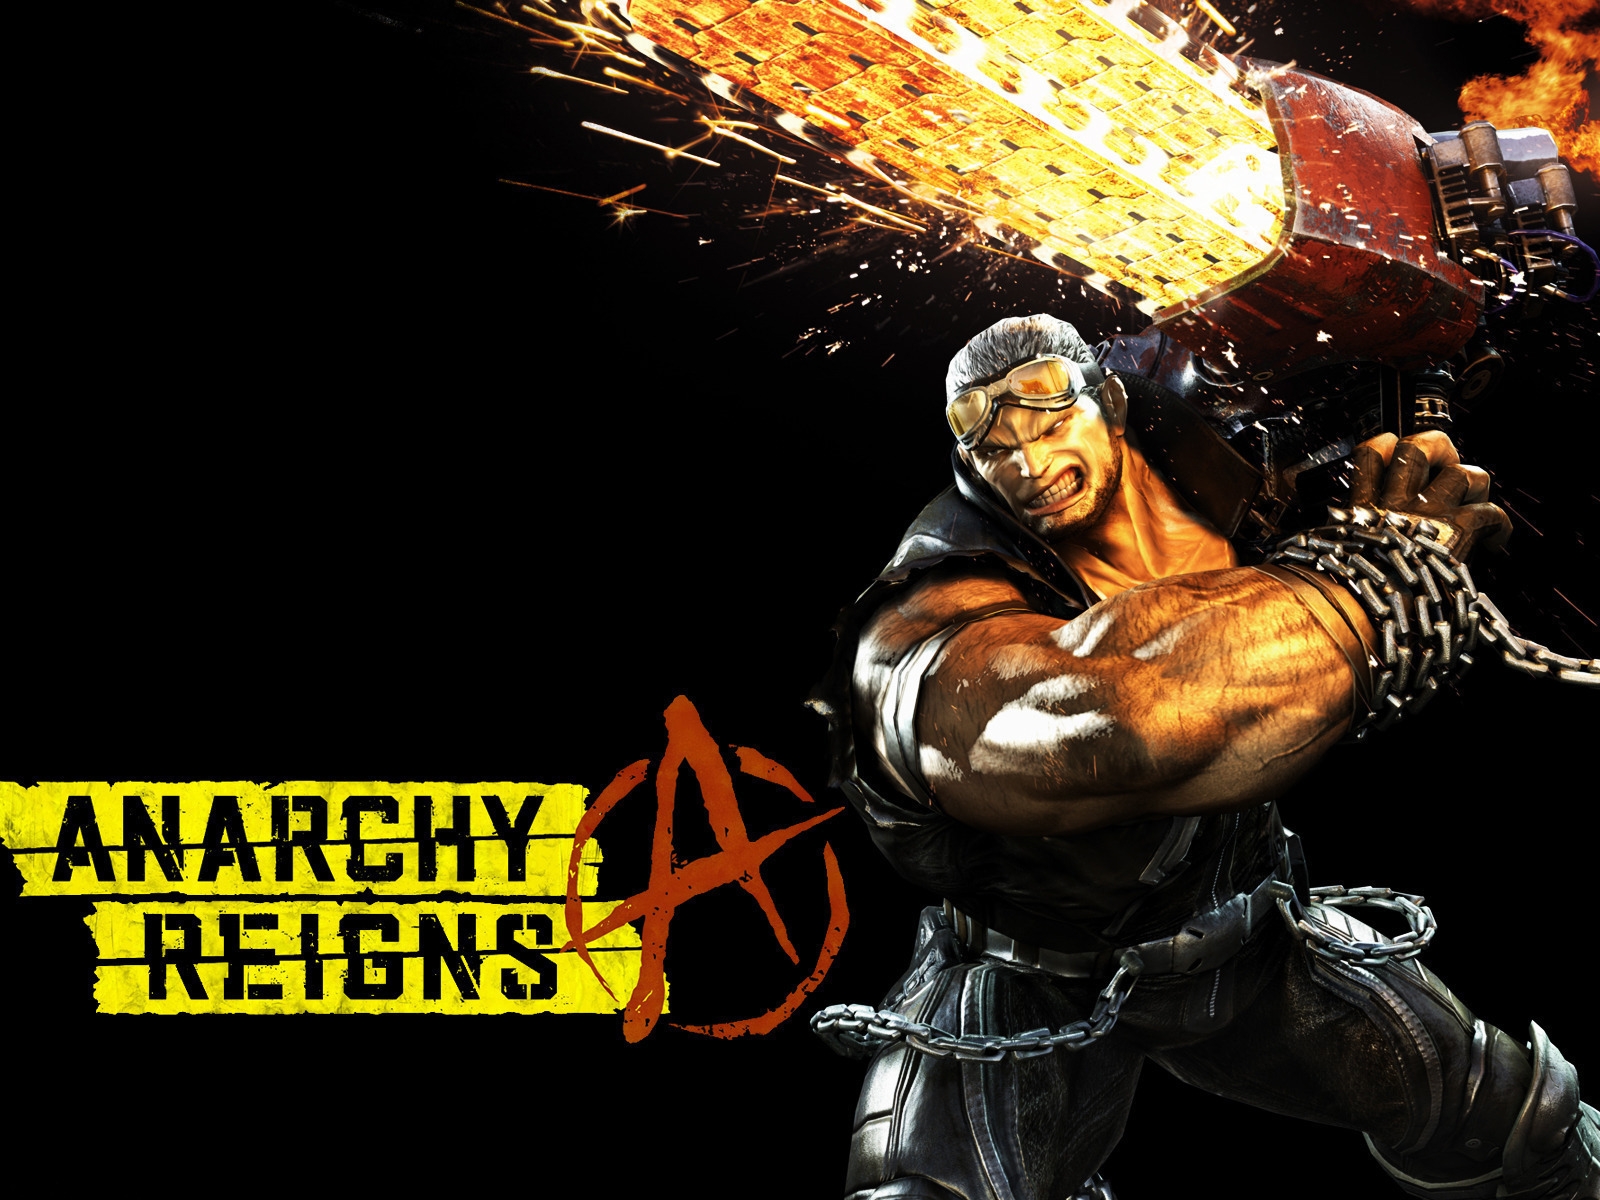 Anarchy Reigns 2013 for 1600 x 1200 resolution